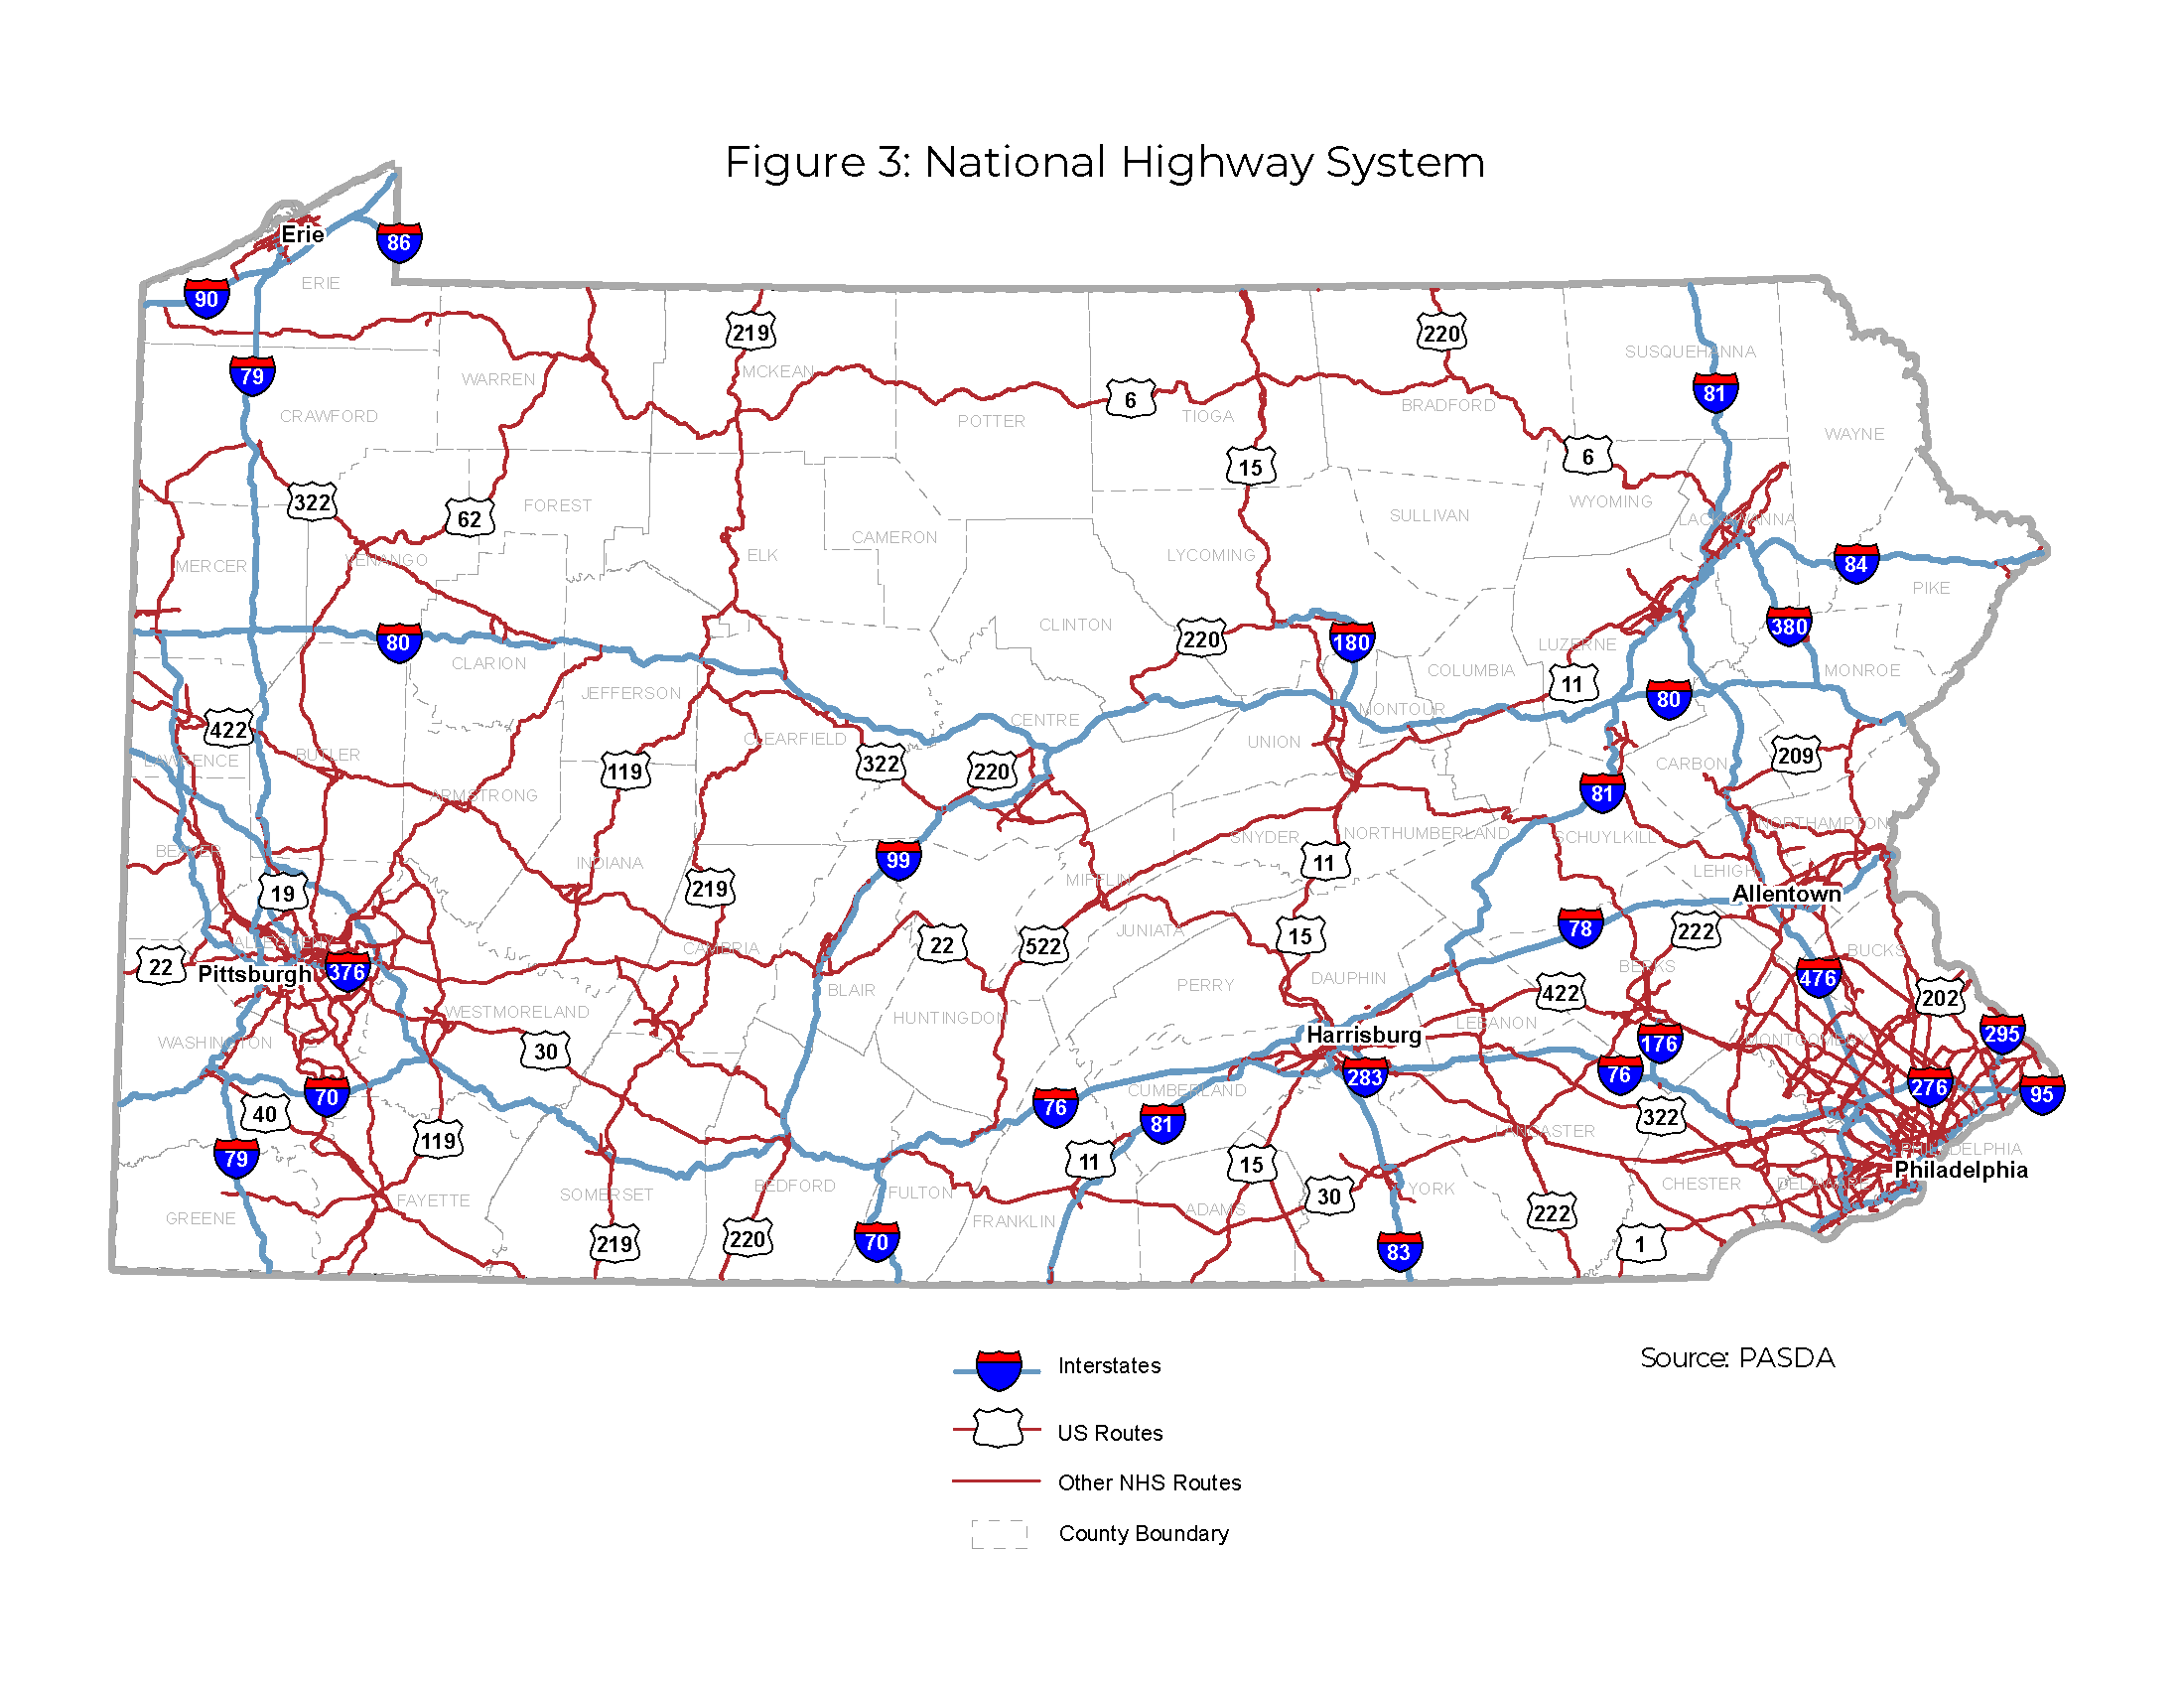 Figure 3 is a state map of Pennsylvania illustrating the National Highway System Routes, Interstates, US Routes, and county boundaries.